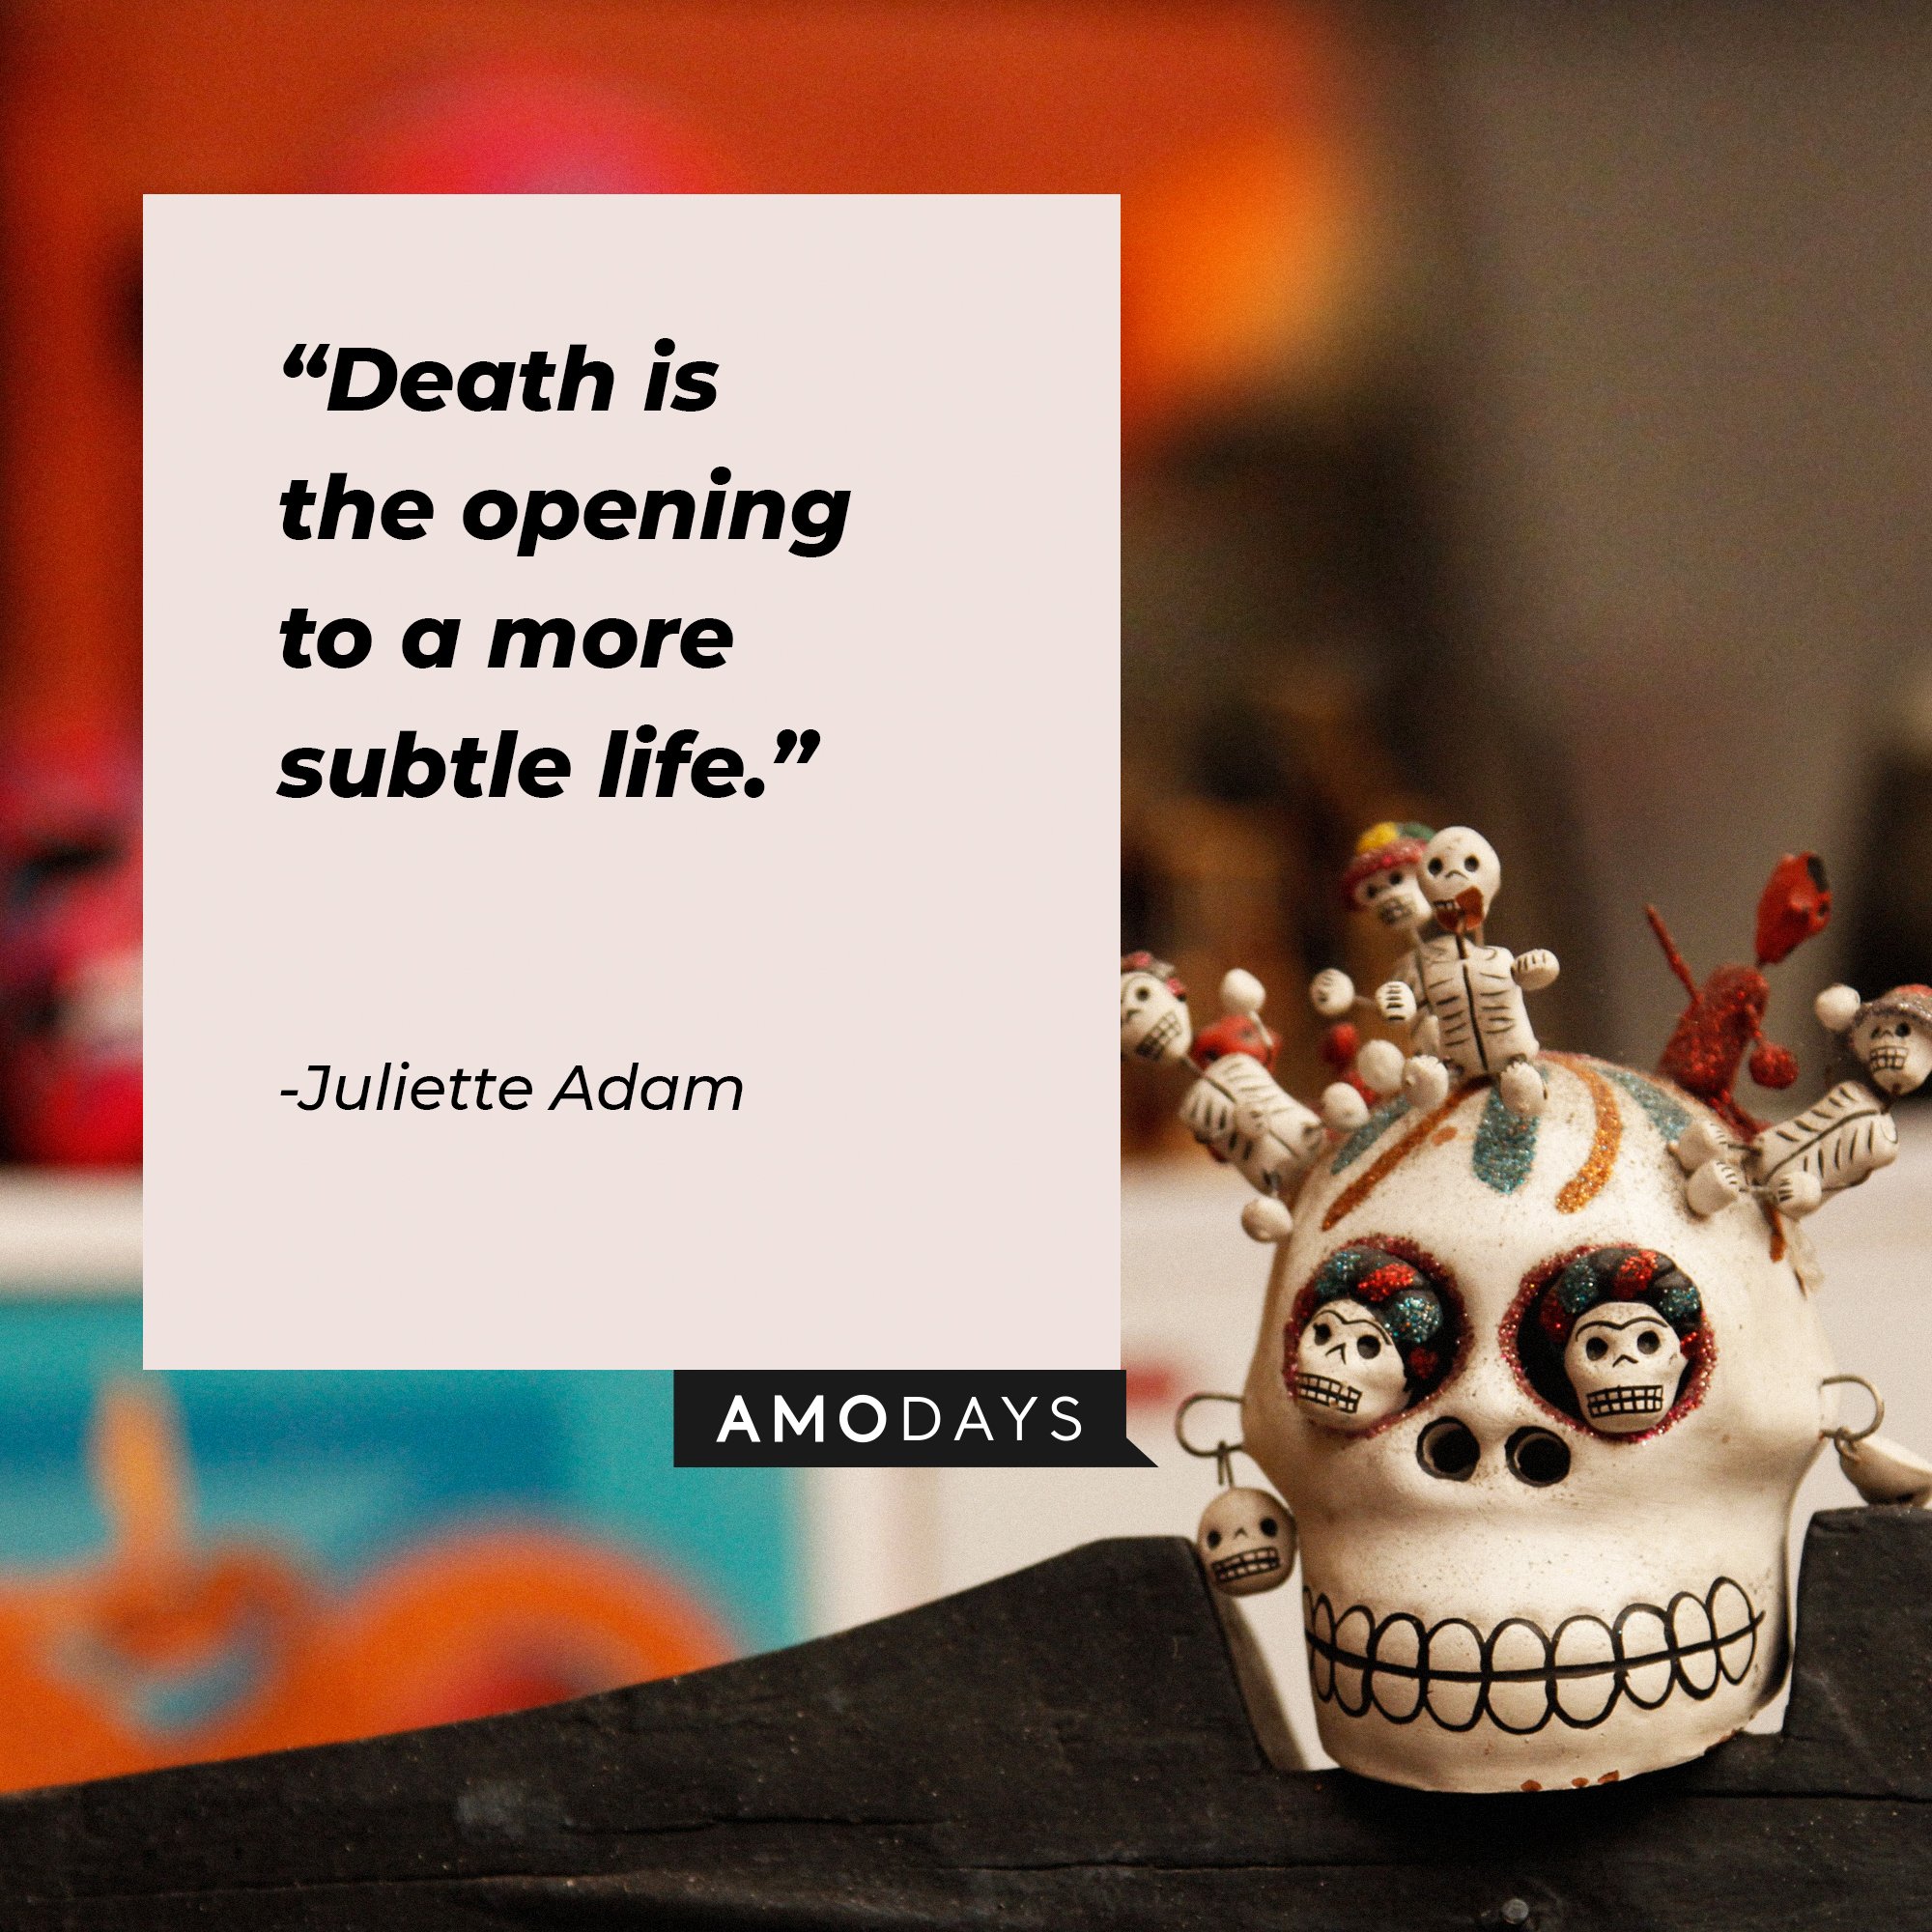 Juliette Adam's quote: "Death is the opening to a more subtle life.” | Image: AmoDays 